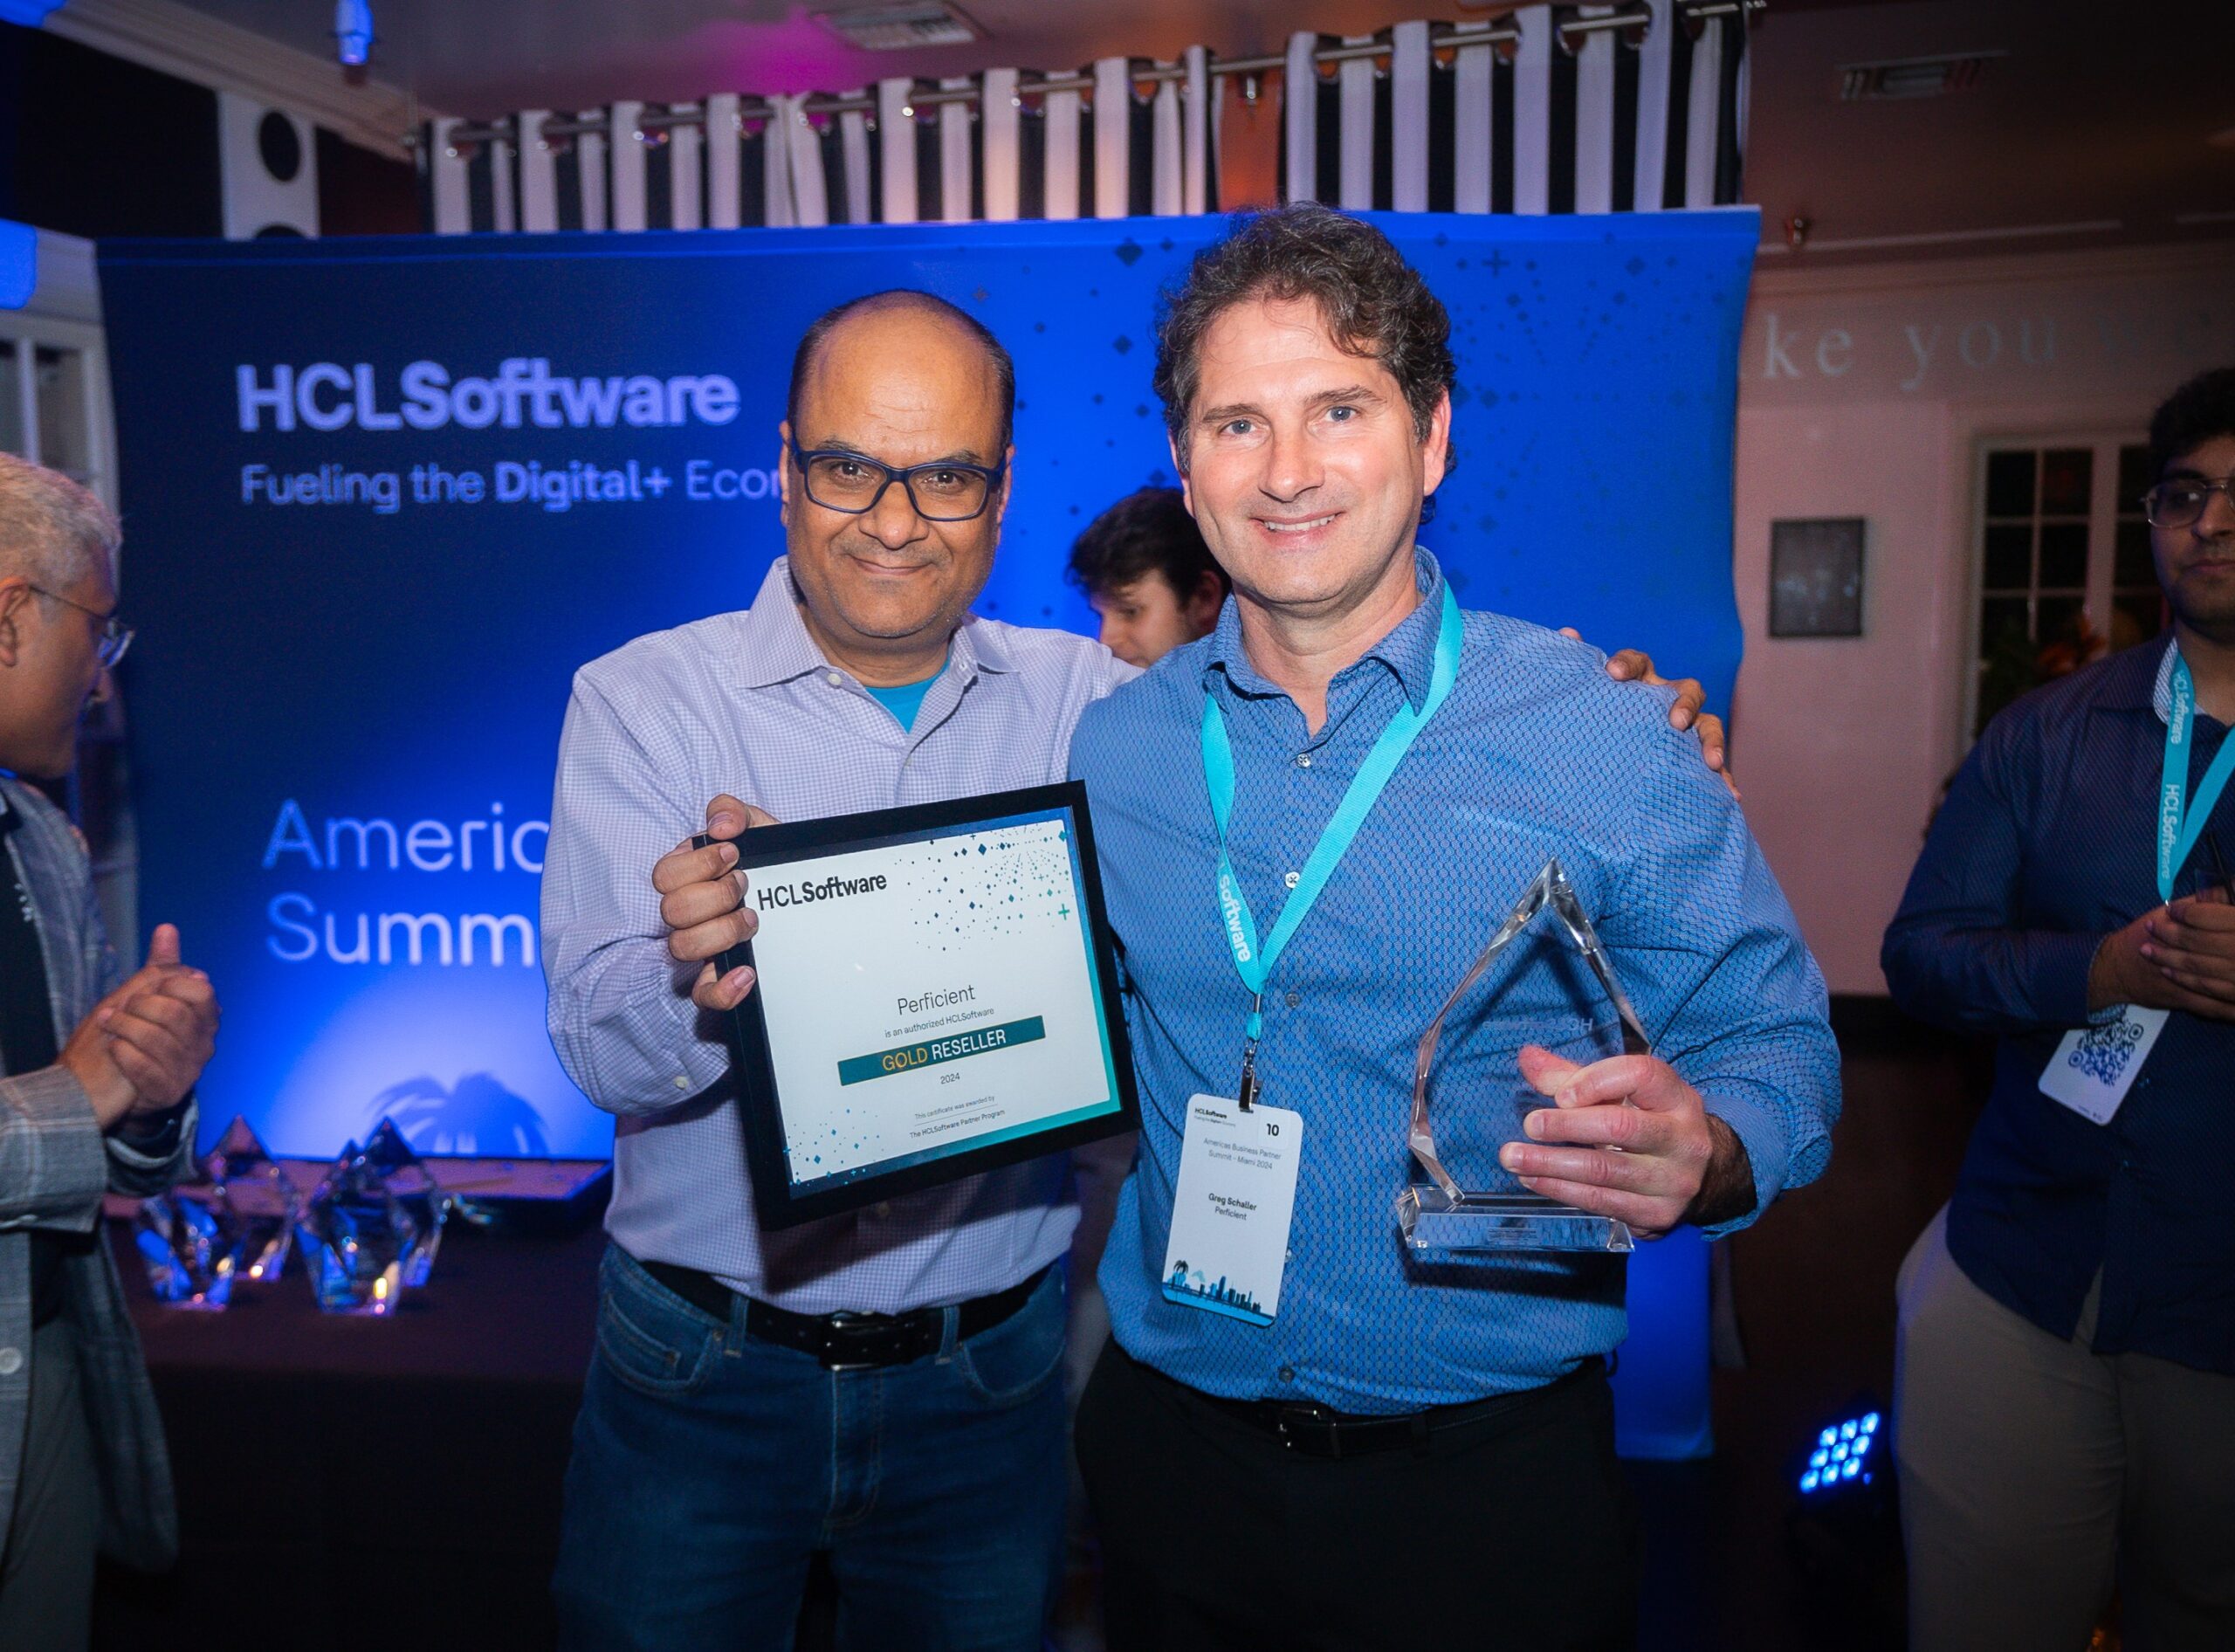 Perficient Awarded as HCL Software’s Gold Reseller Award / Blogs / Perficient